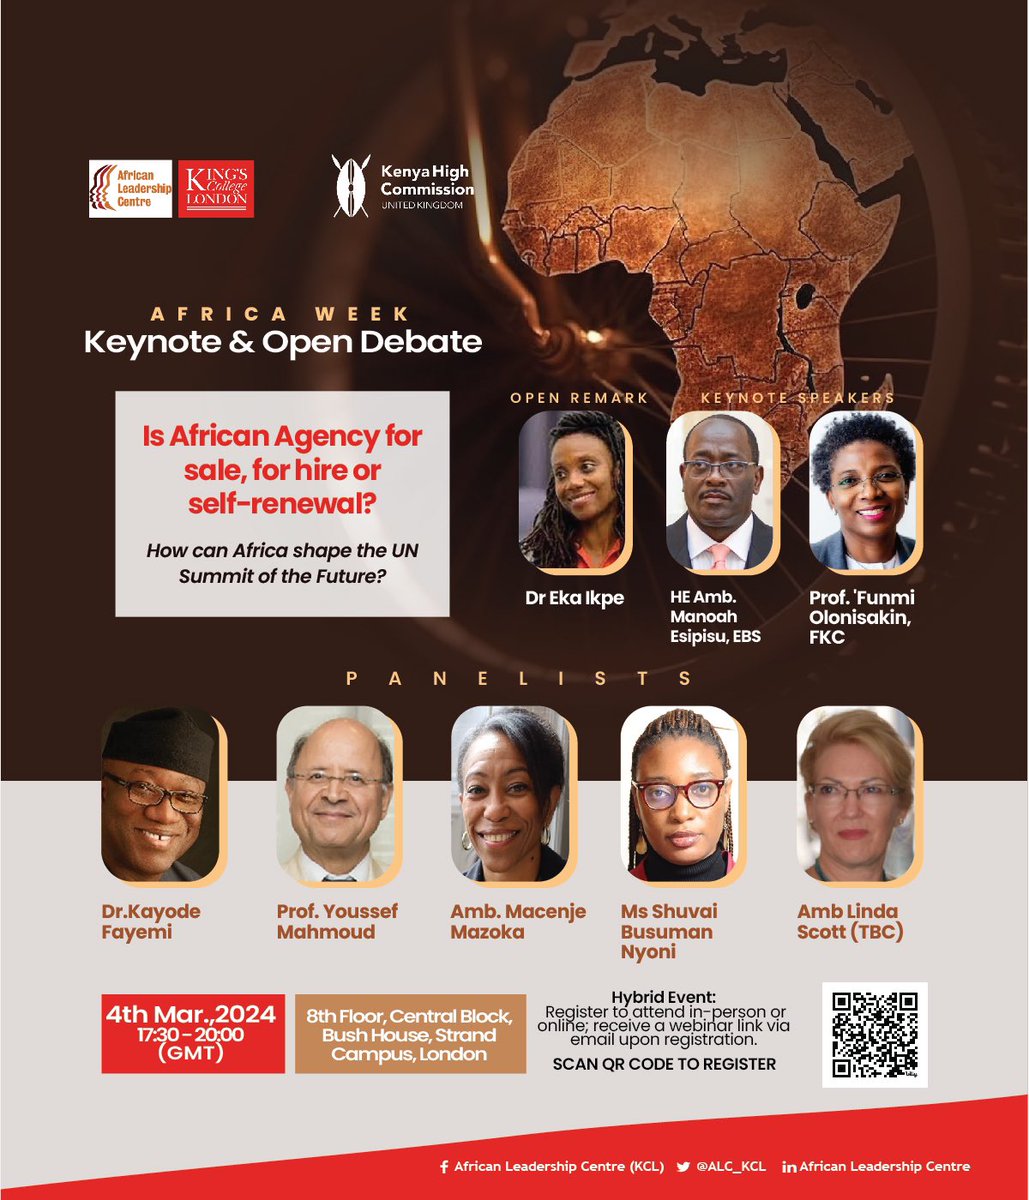 An opening debate and keynote will kickstart the Africa Week 2024 @ALC_KCL on March 4 with the title: 'Is African Agency for sale, for hire, or self-renewal? How can Africa shape the UN Summit of the Future?'.   Kindly Register here: bit.ly/3wl4Ale   #Africa2024